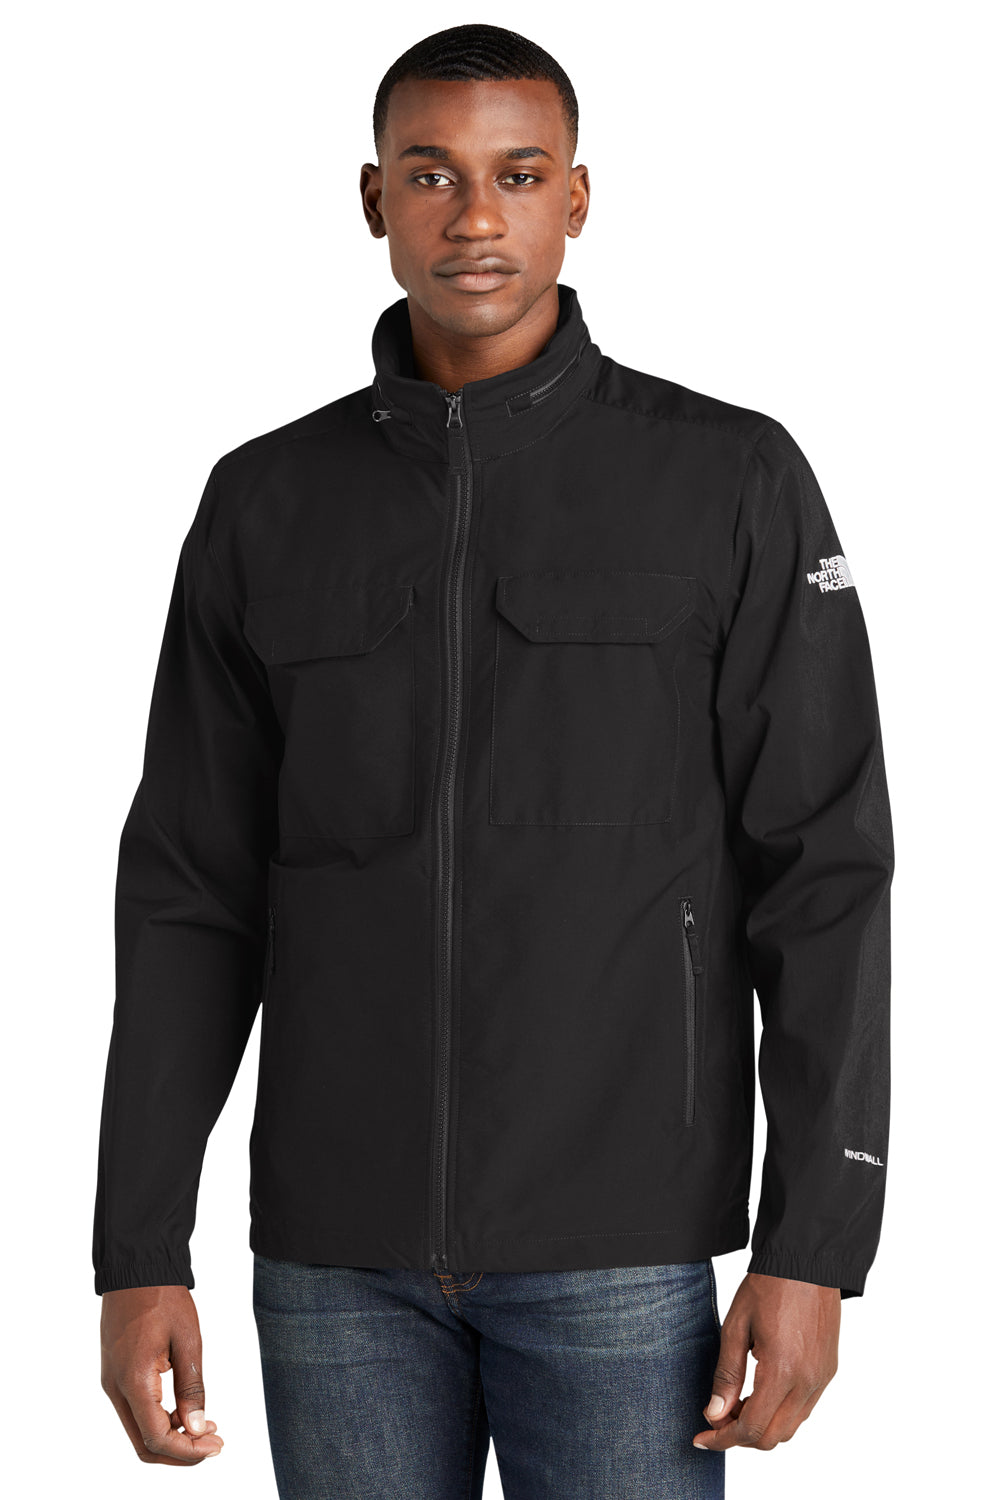 The North Face NF0A5ISG Packable Travel Full Zip Jacket Black Front